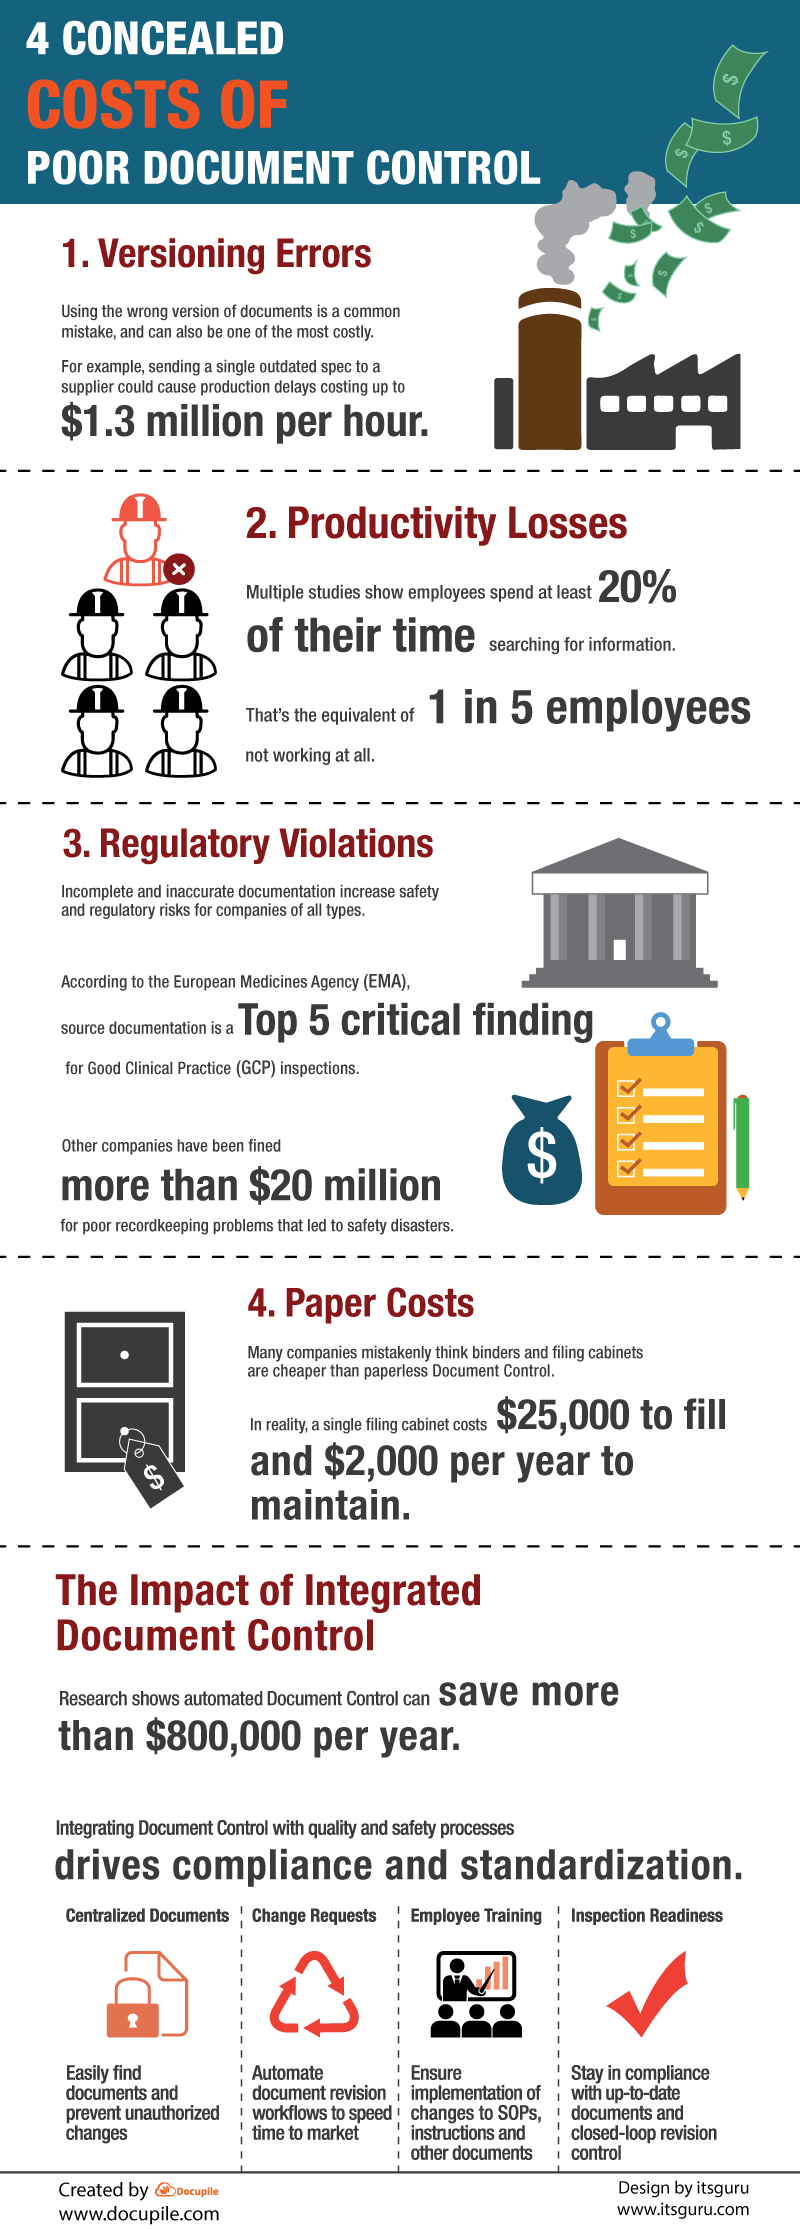 4 Concealed Costs of Poor Document Control - DMS | Docupile